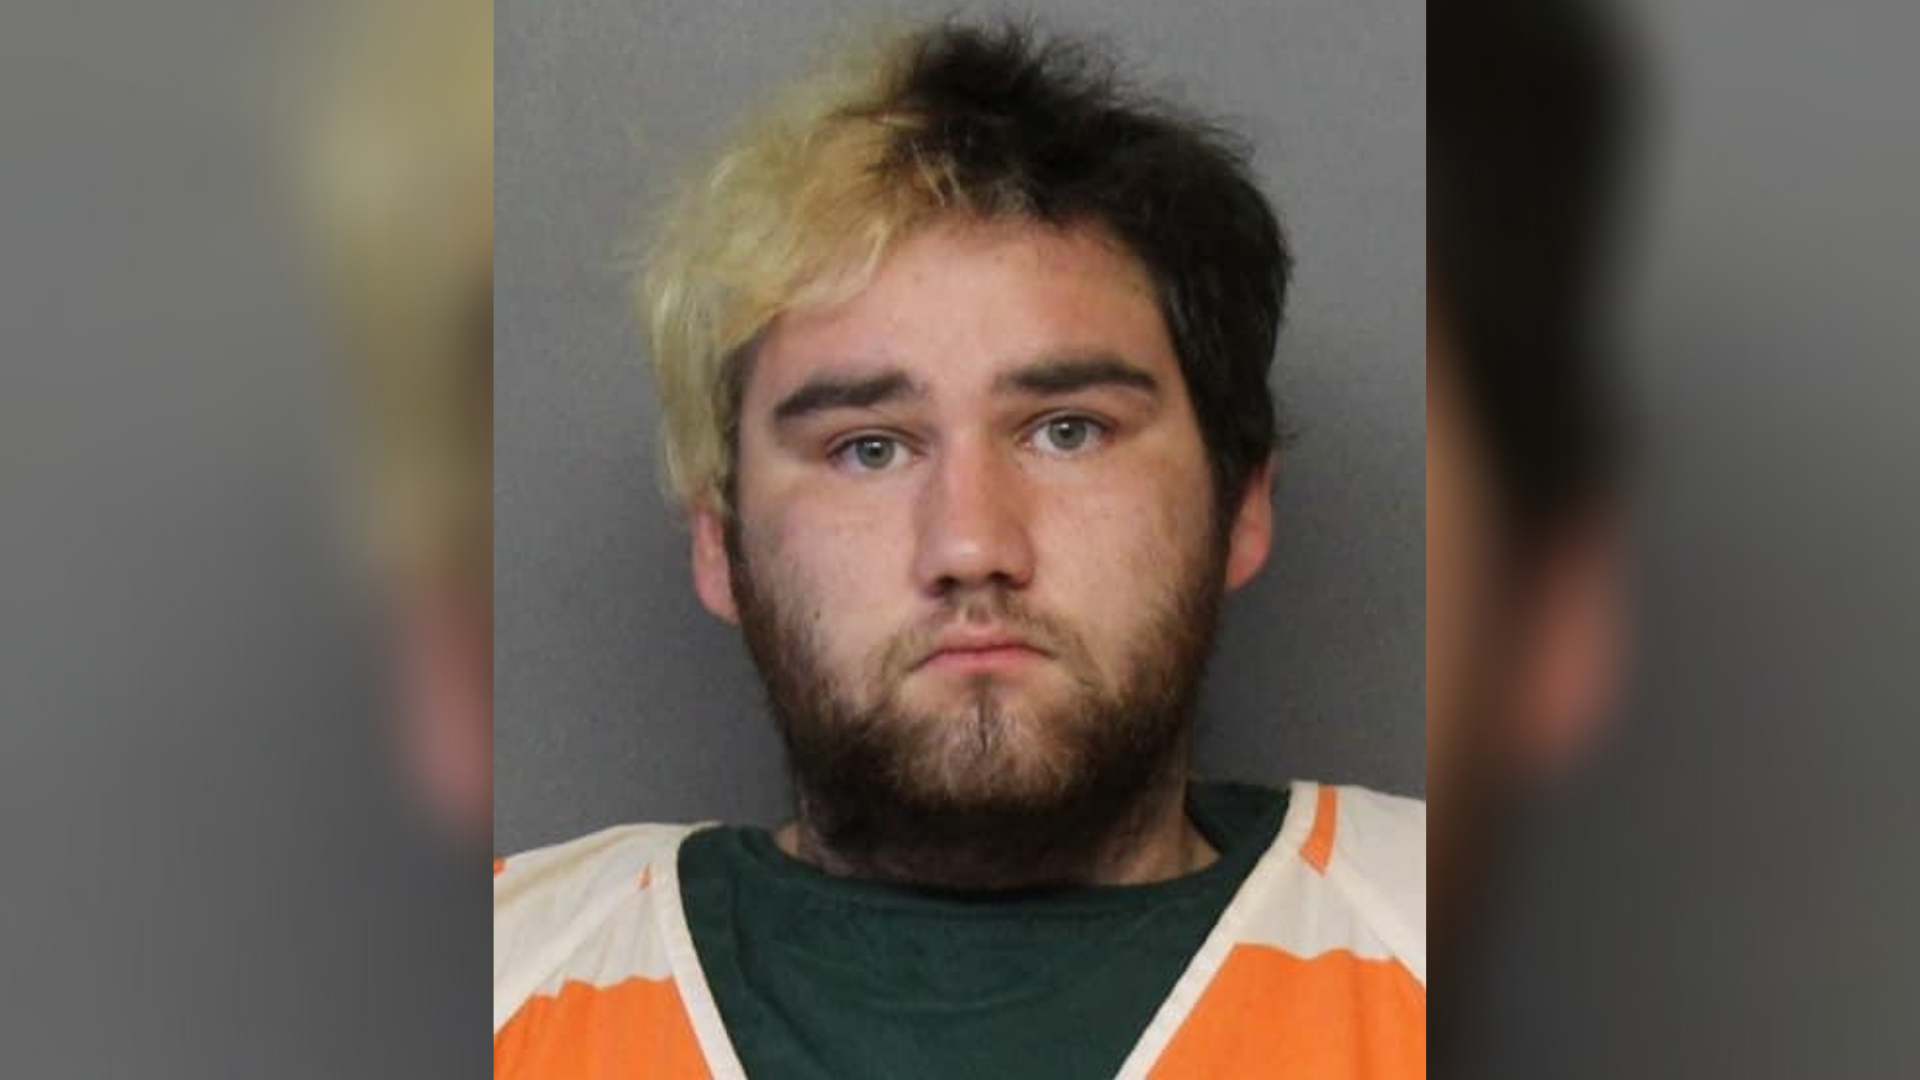 UPDATE Suspect in custody after 19-year-old fatally shot at Texas Renaissance Festival campgrounds